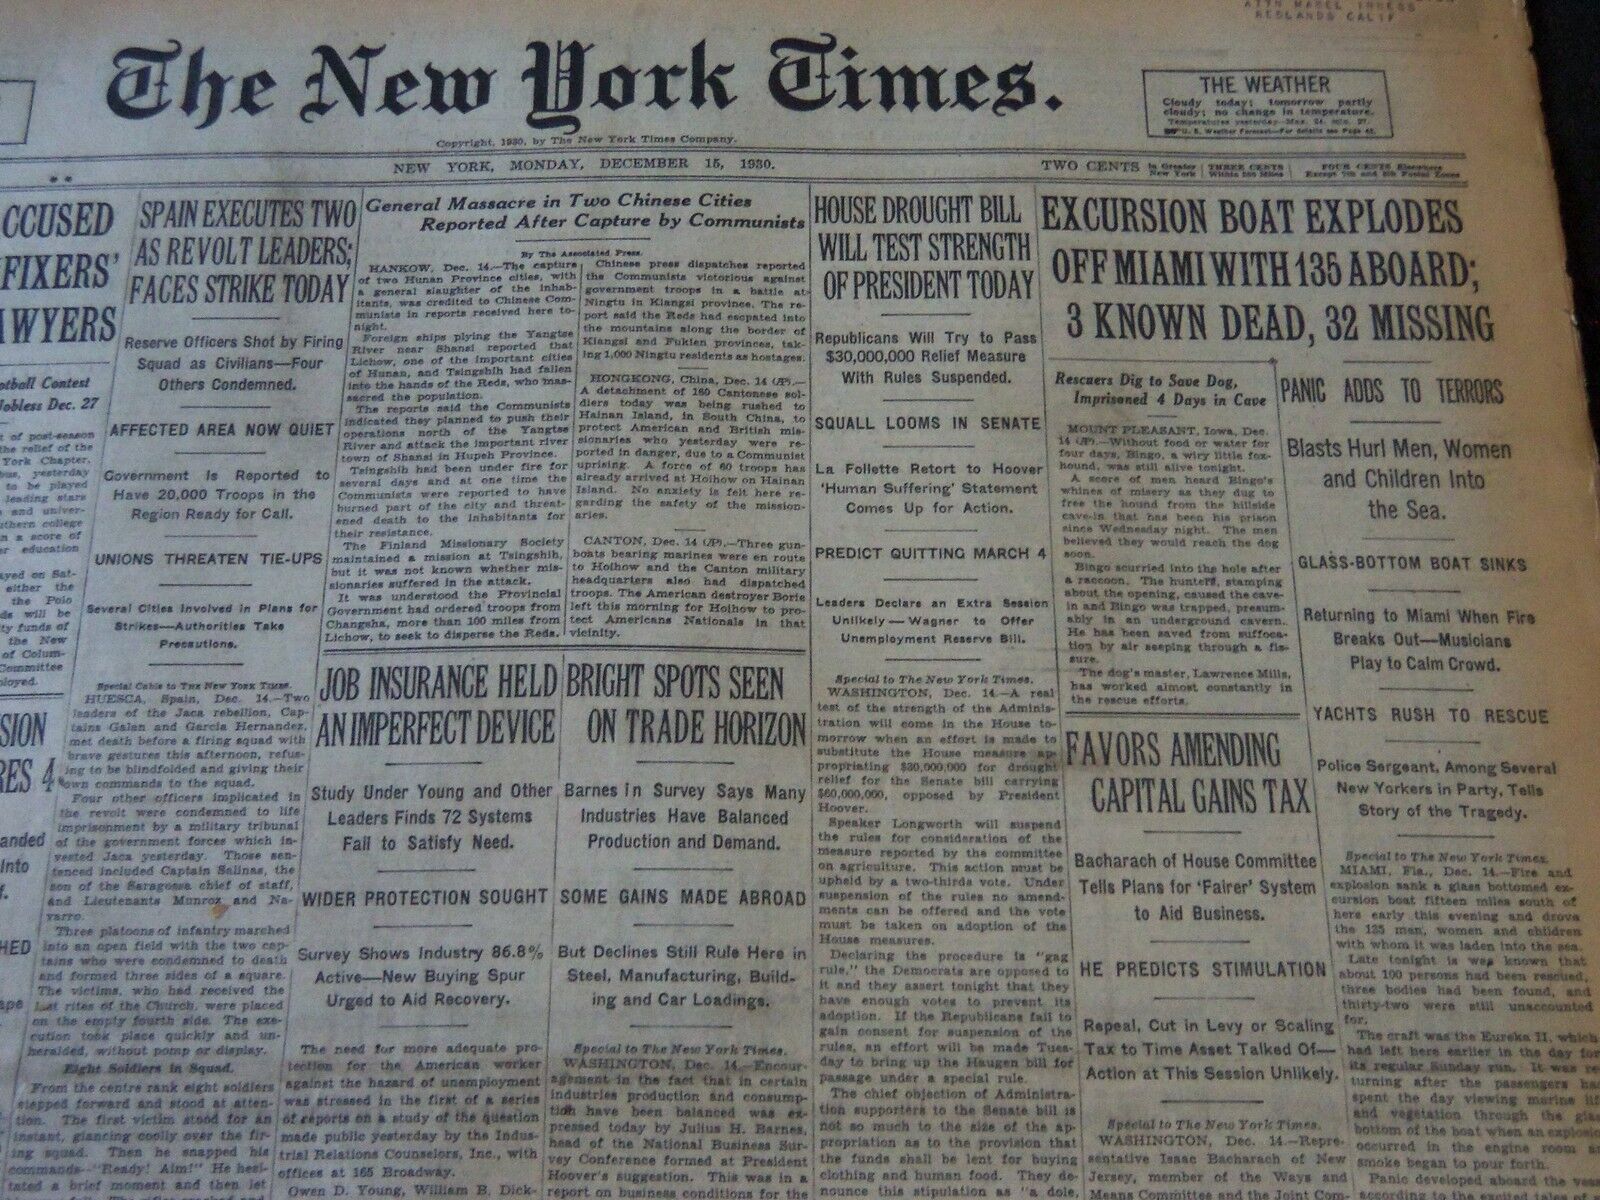 1930 DECEMBER 15 NEW YORK TIMES - EXCURSION BOAT EXPLODES OFF MIAMI - NT 5638